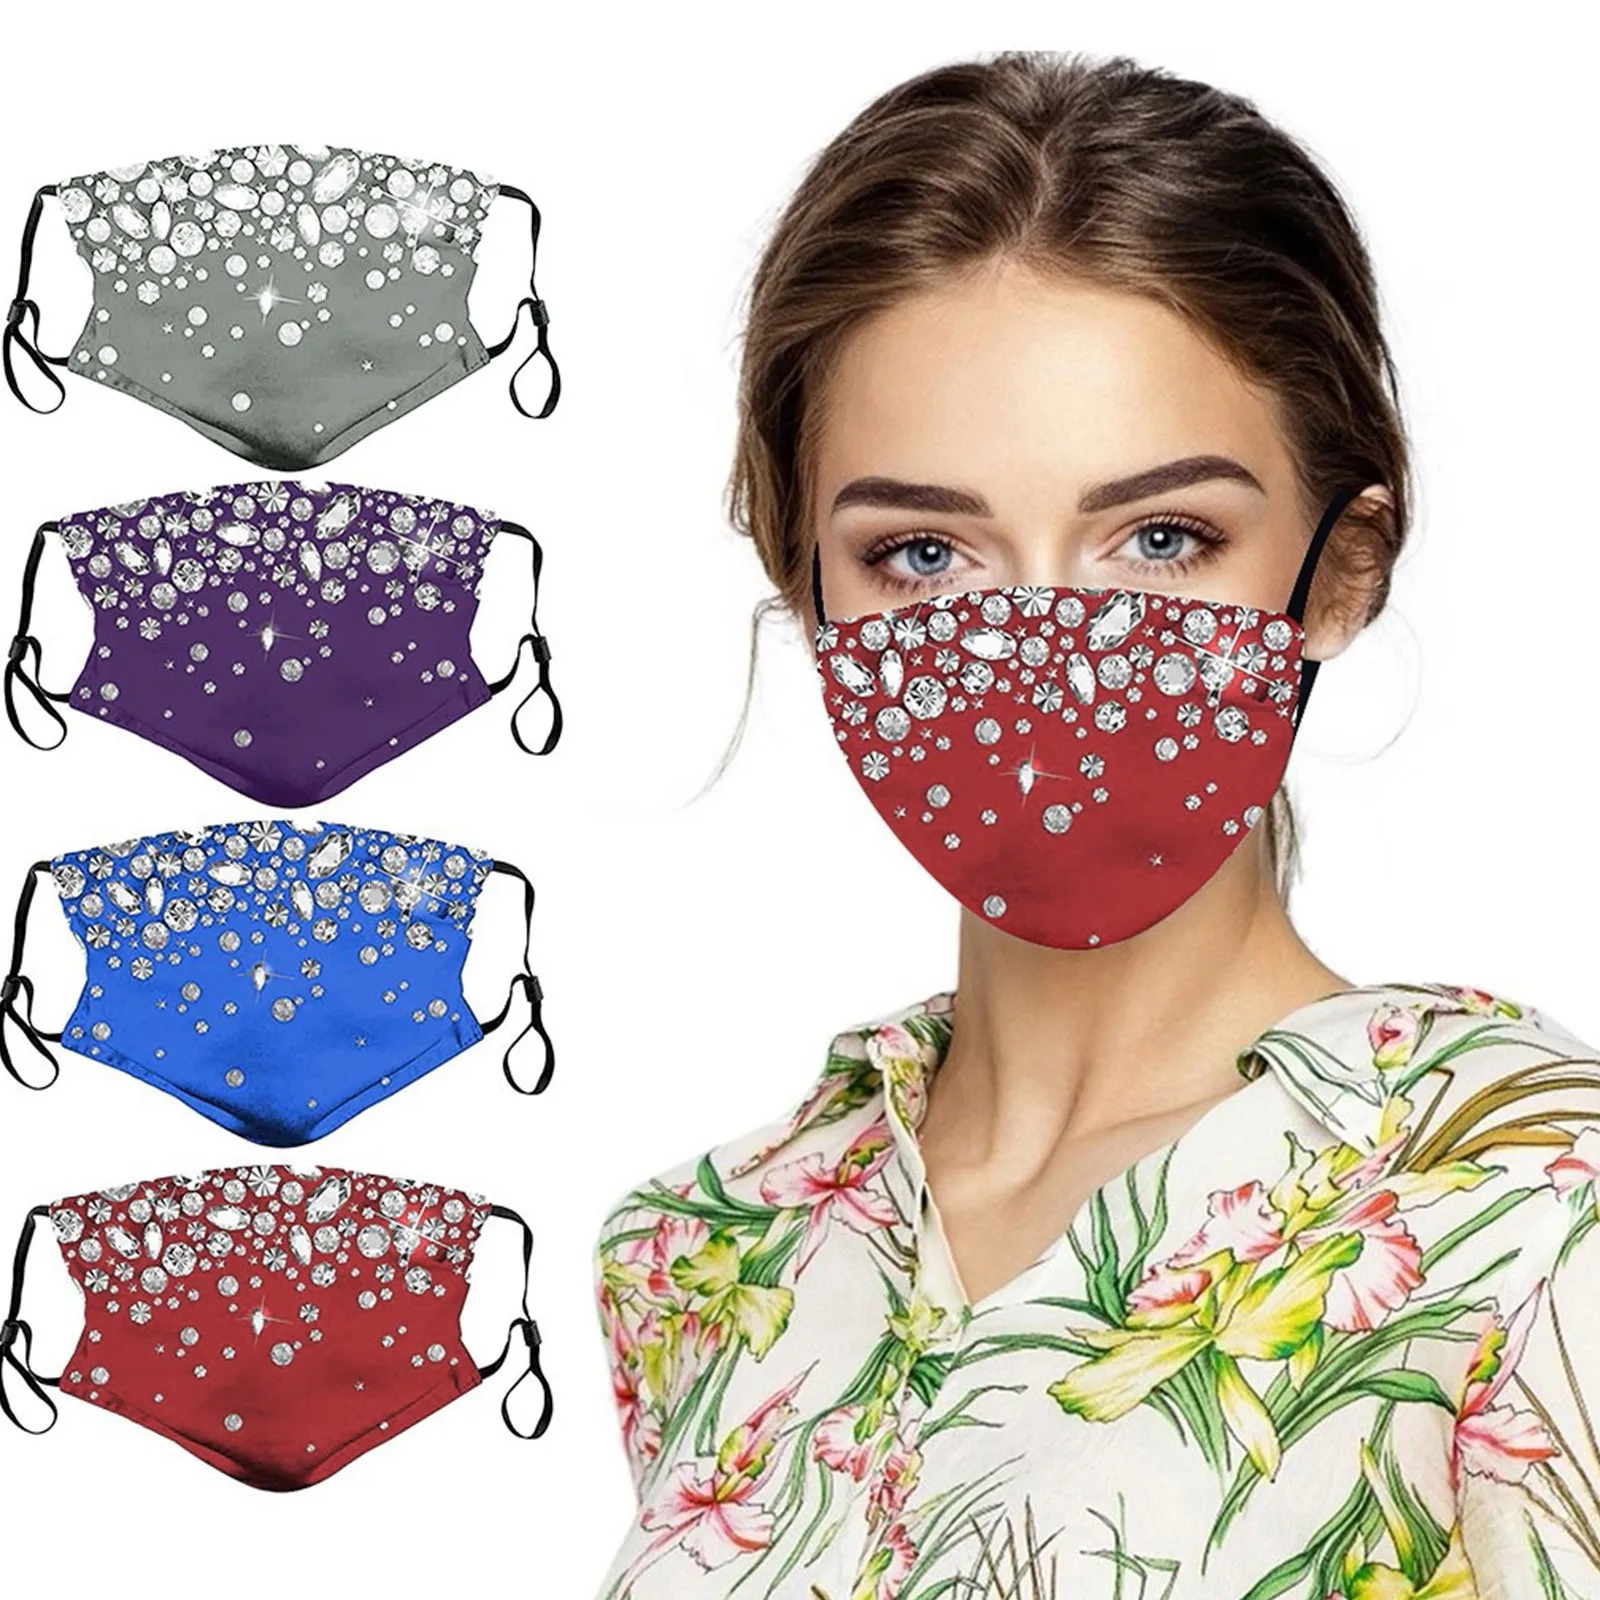 

Comfortable Cotton Protective Reusable Washable Mask Luxury Women'S Rhinestone Breathable Mask Outdoors Dust Fitted Mask